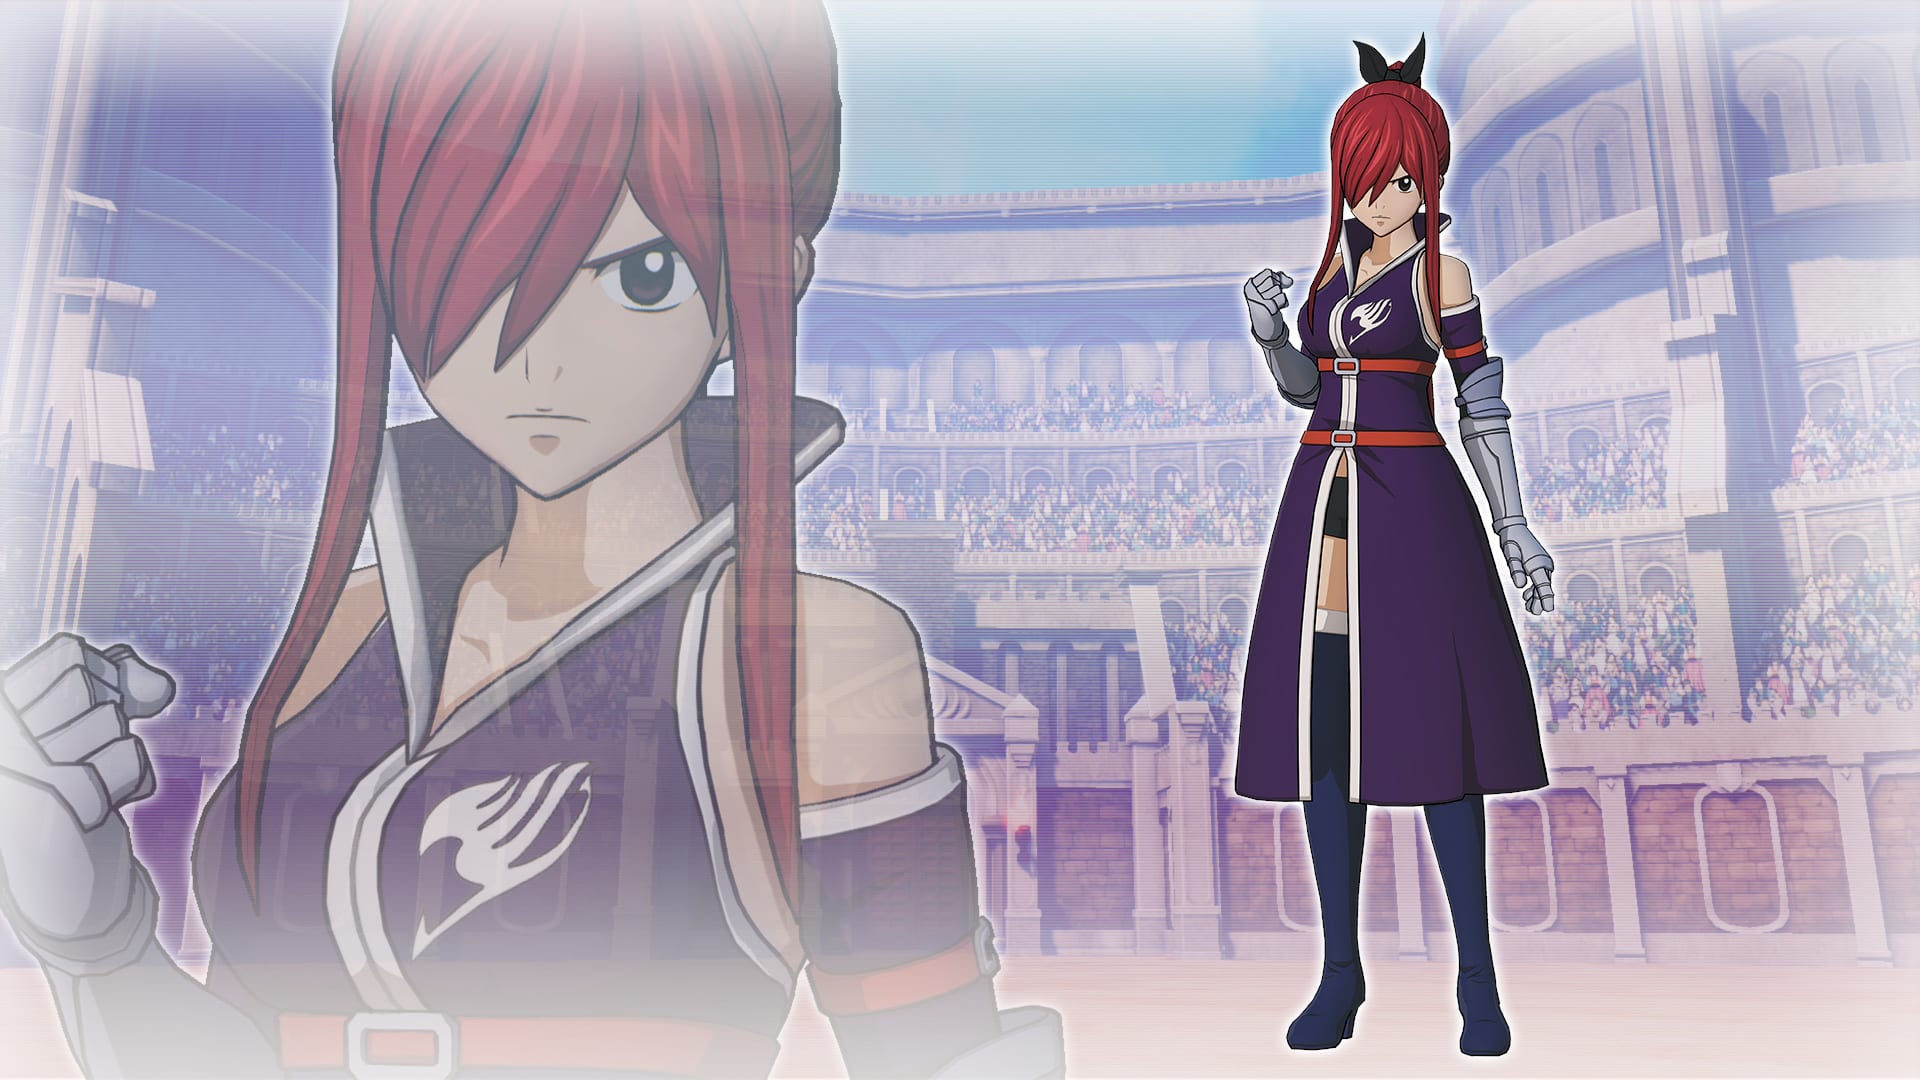 Erza's Costume "Fairy Tail Team A"